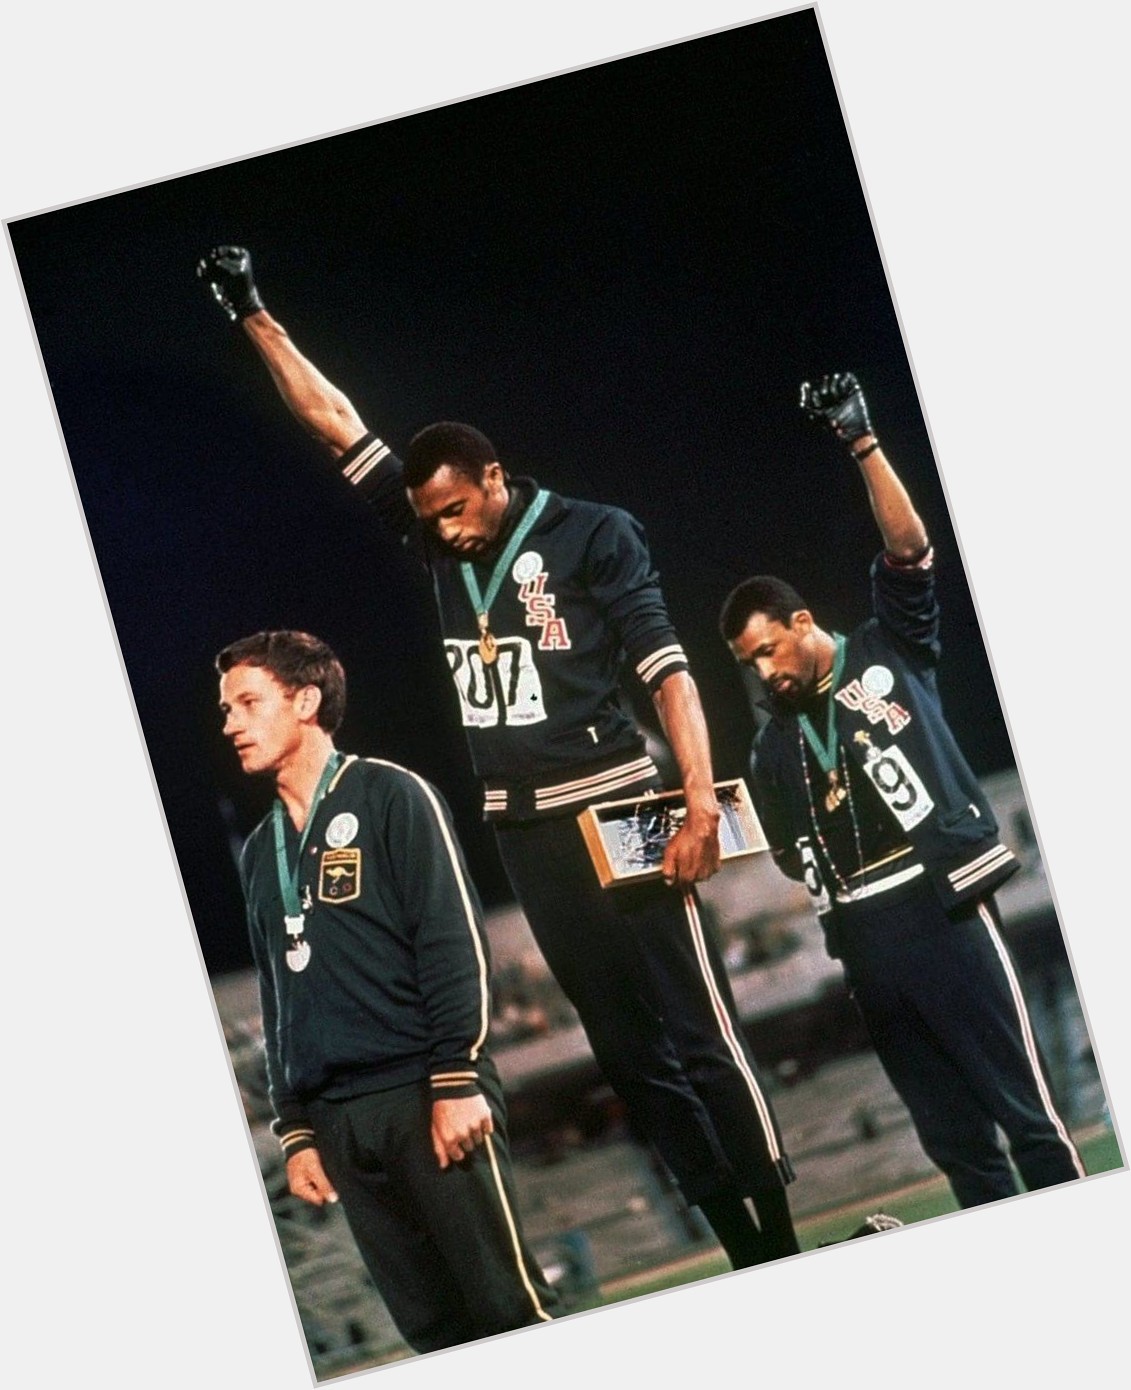 Happy birthday to Tommie Smith! 